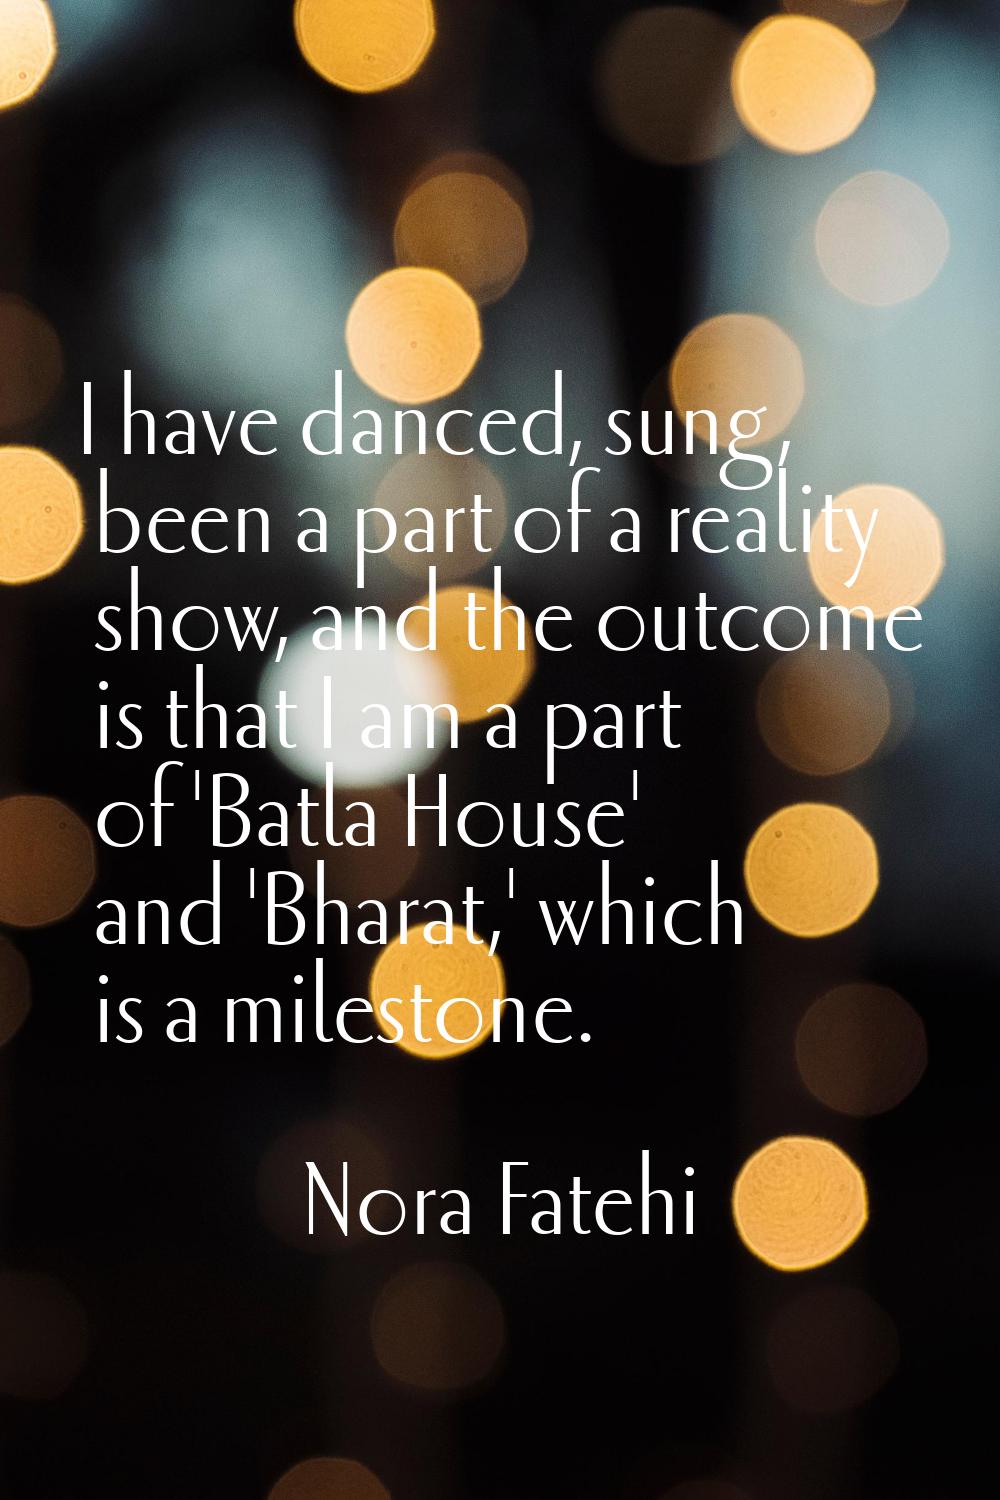 I have danced, sung, been a part of a reality show, and the outcome is that I am a part of 'Batla H